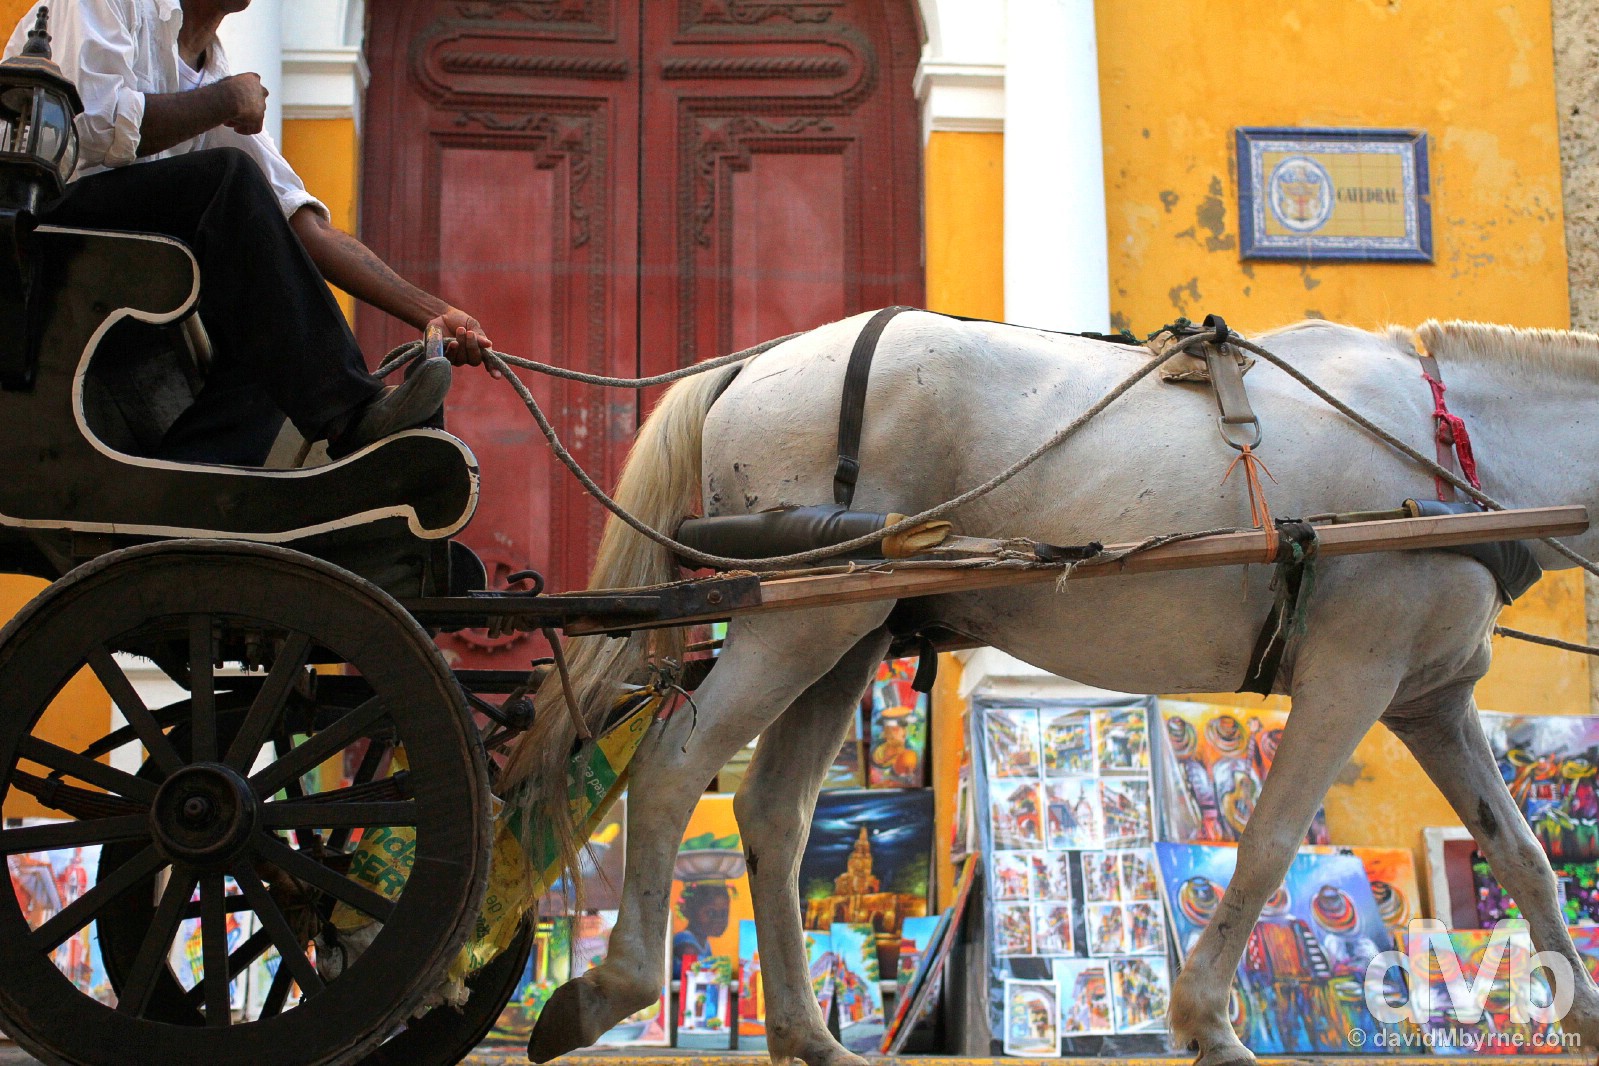 Outside Catedral in Old Town Cartagena, Colombia. June 24, 2015.